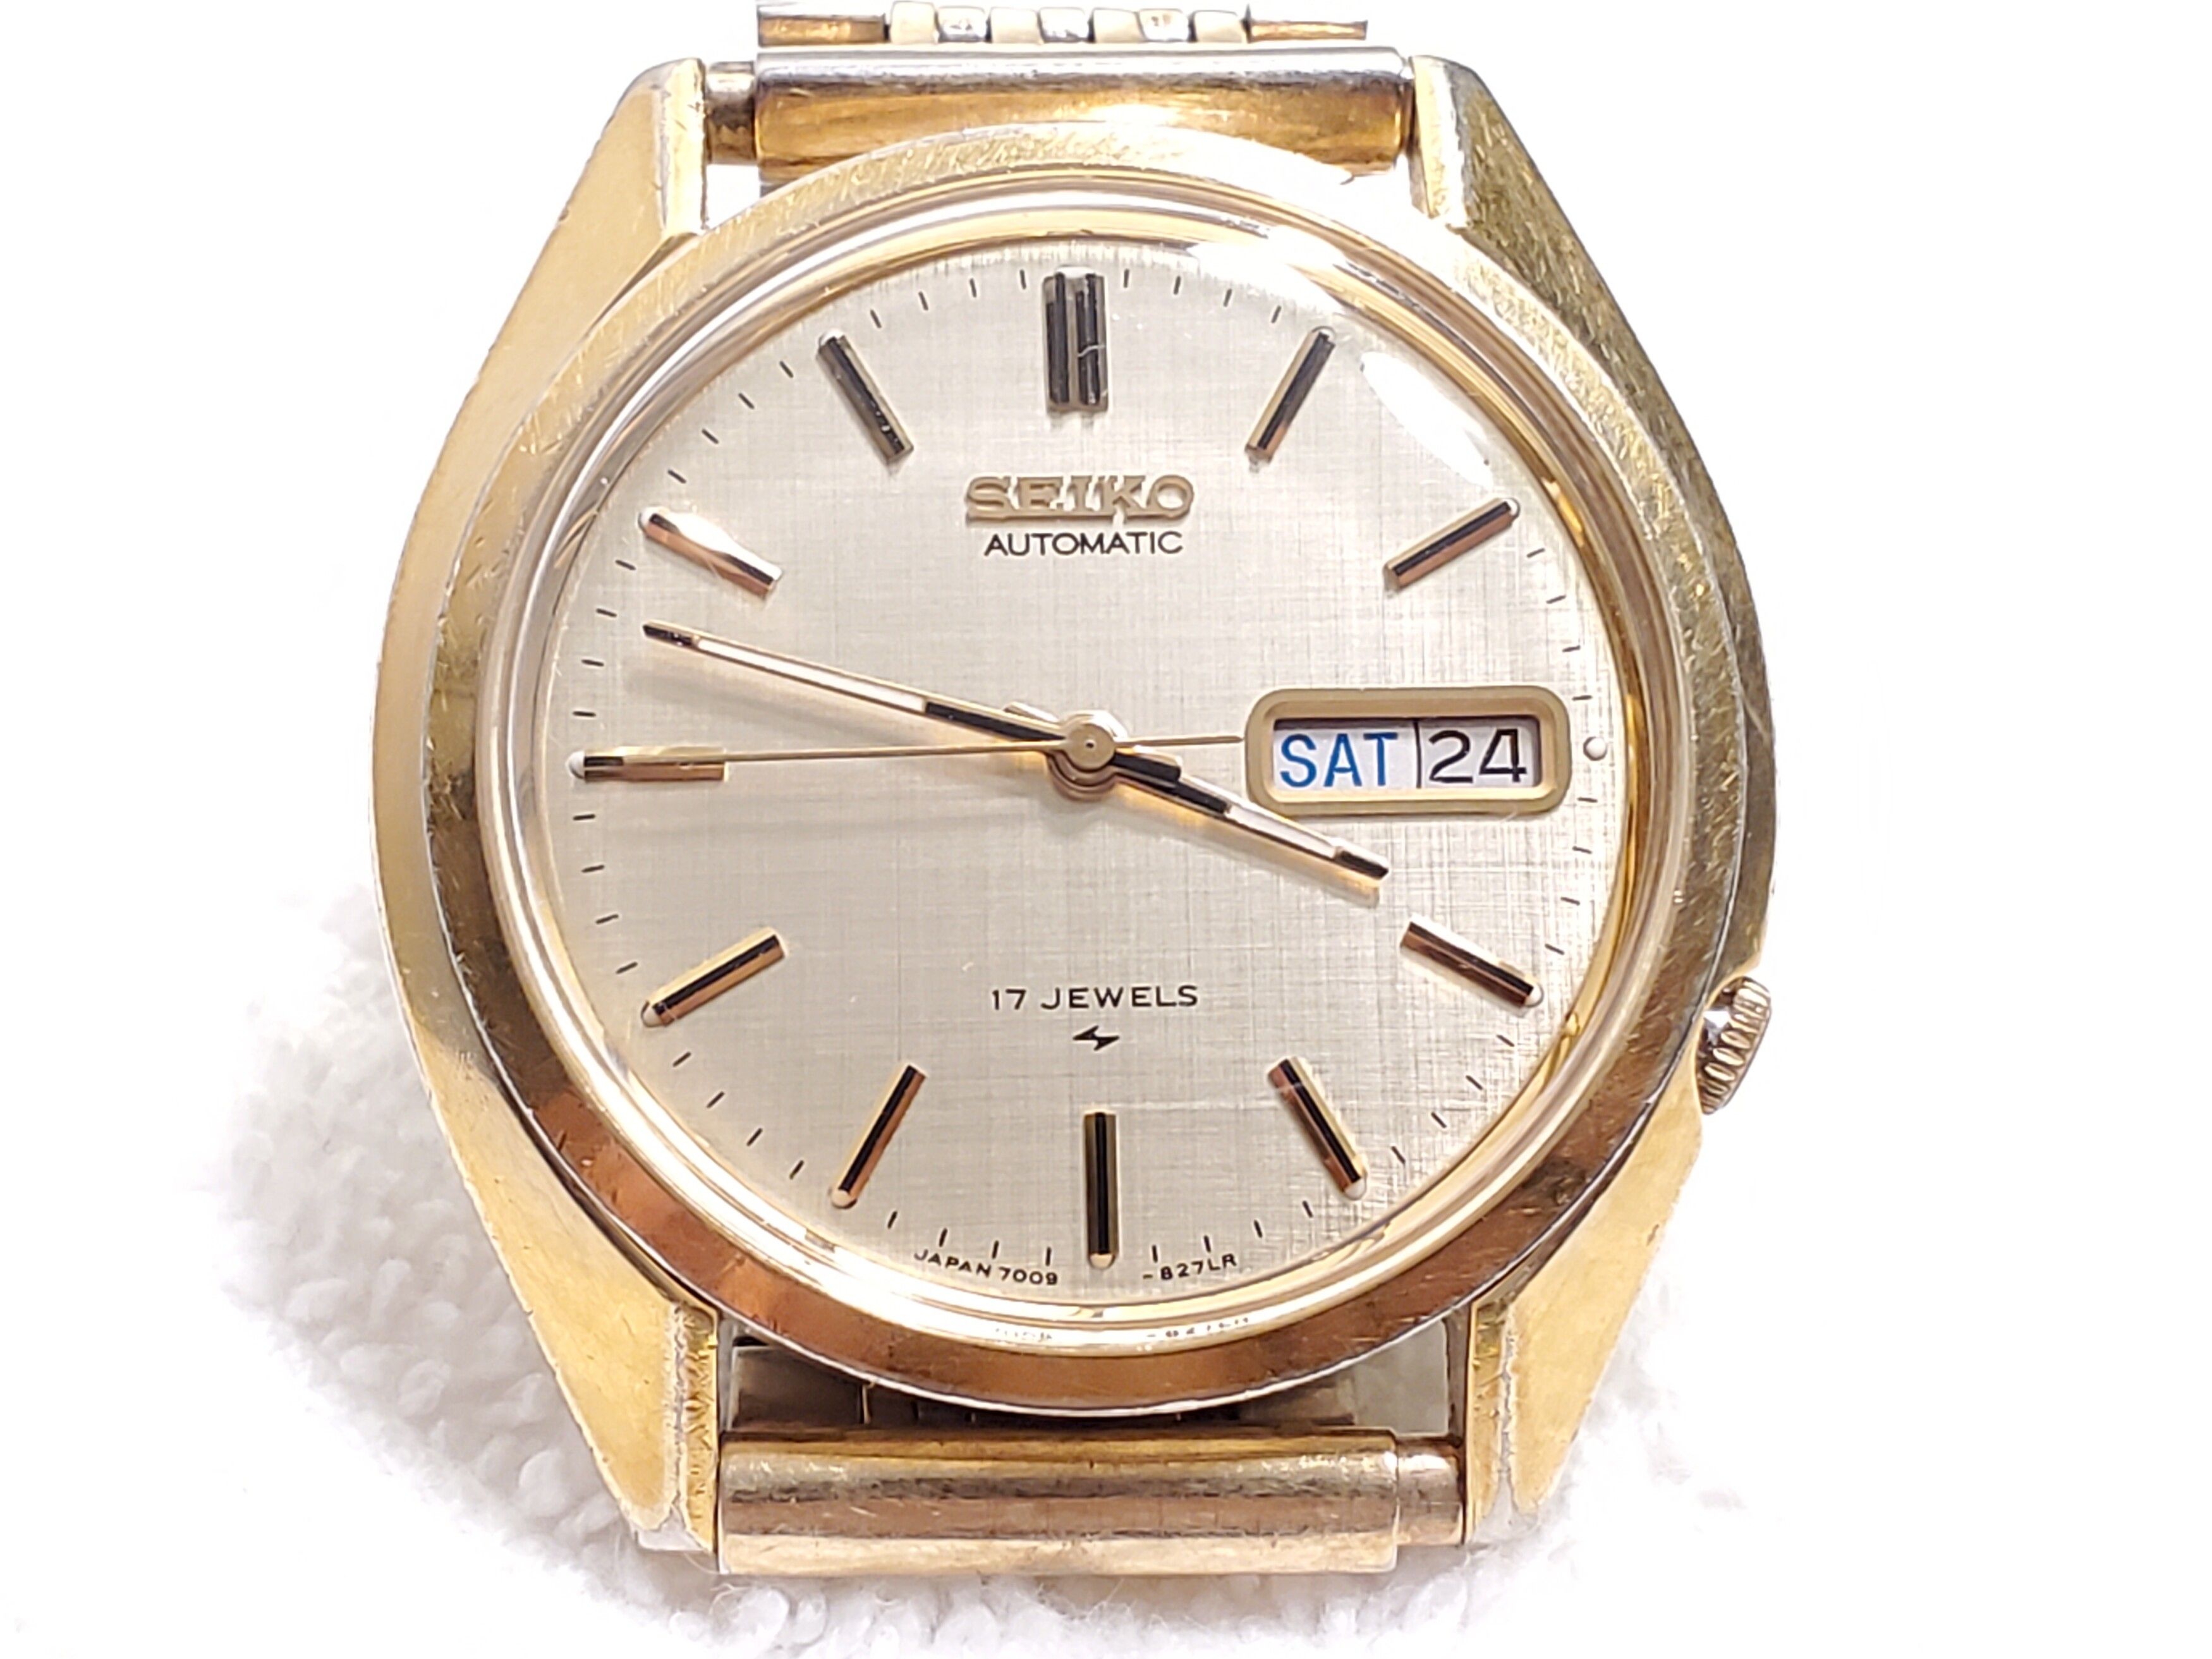 Seiko Vintage Seiko Automatic Day Date Watch Seventeen Jewels Size 36 - 1 Preview